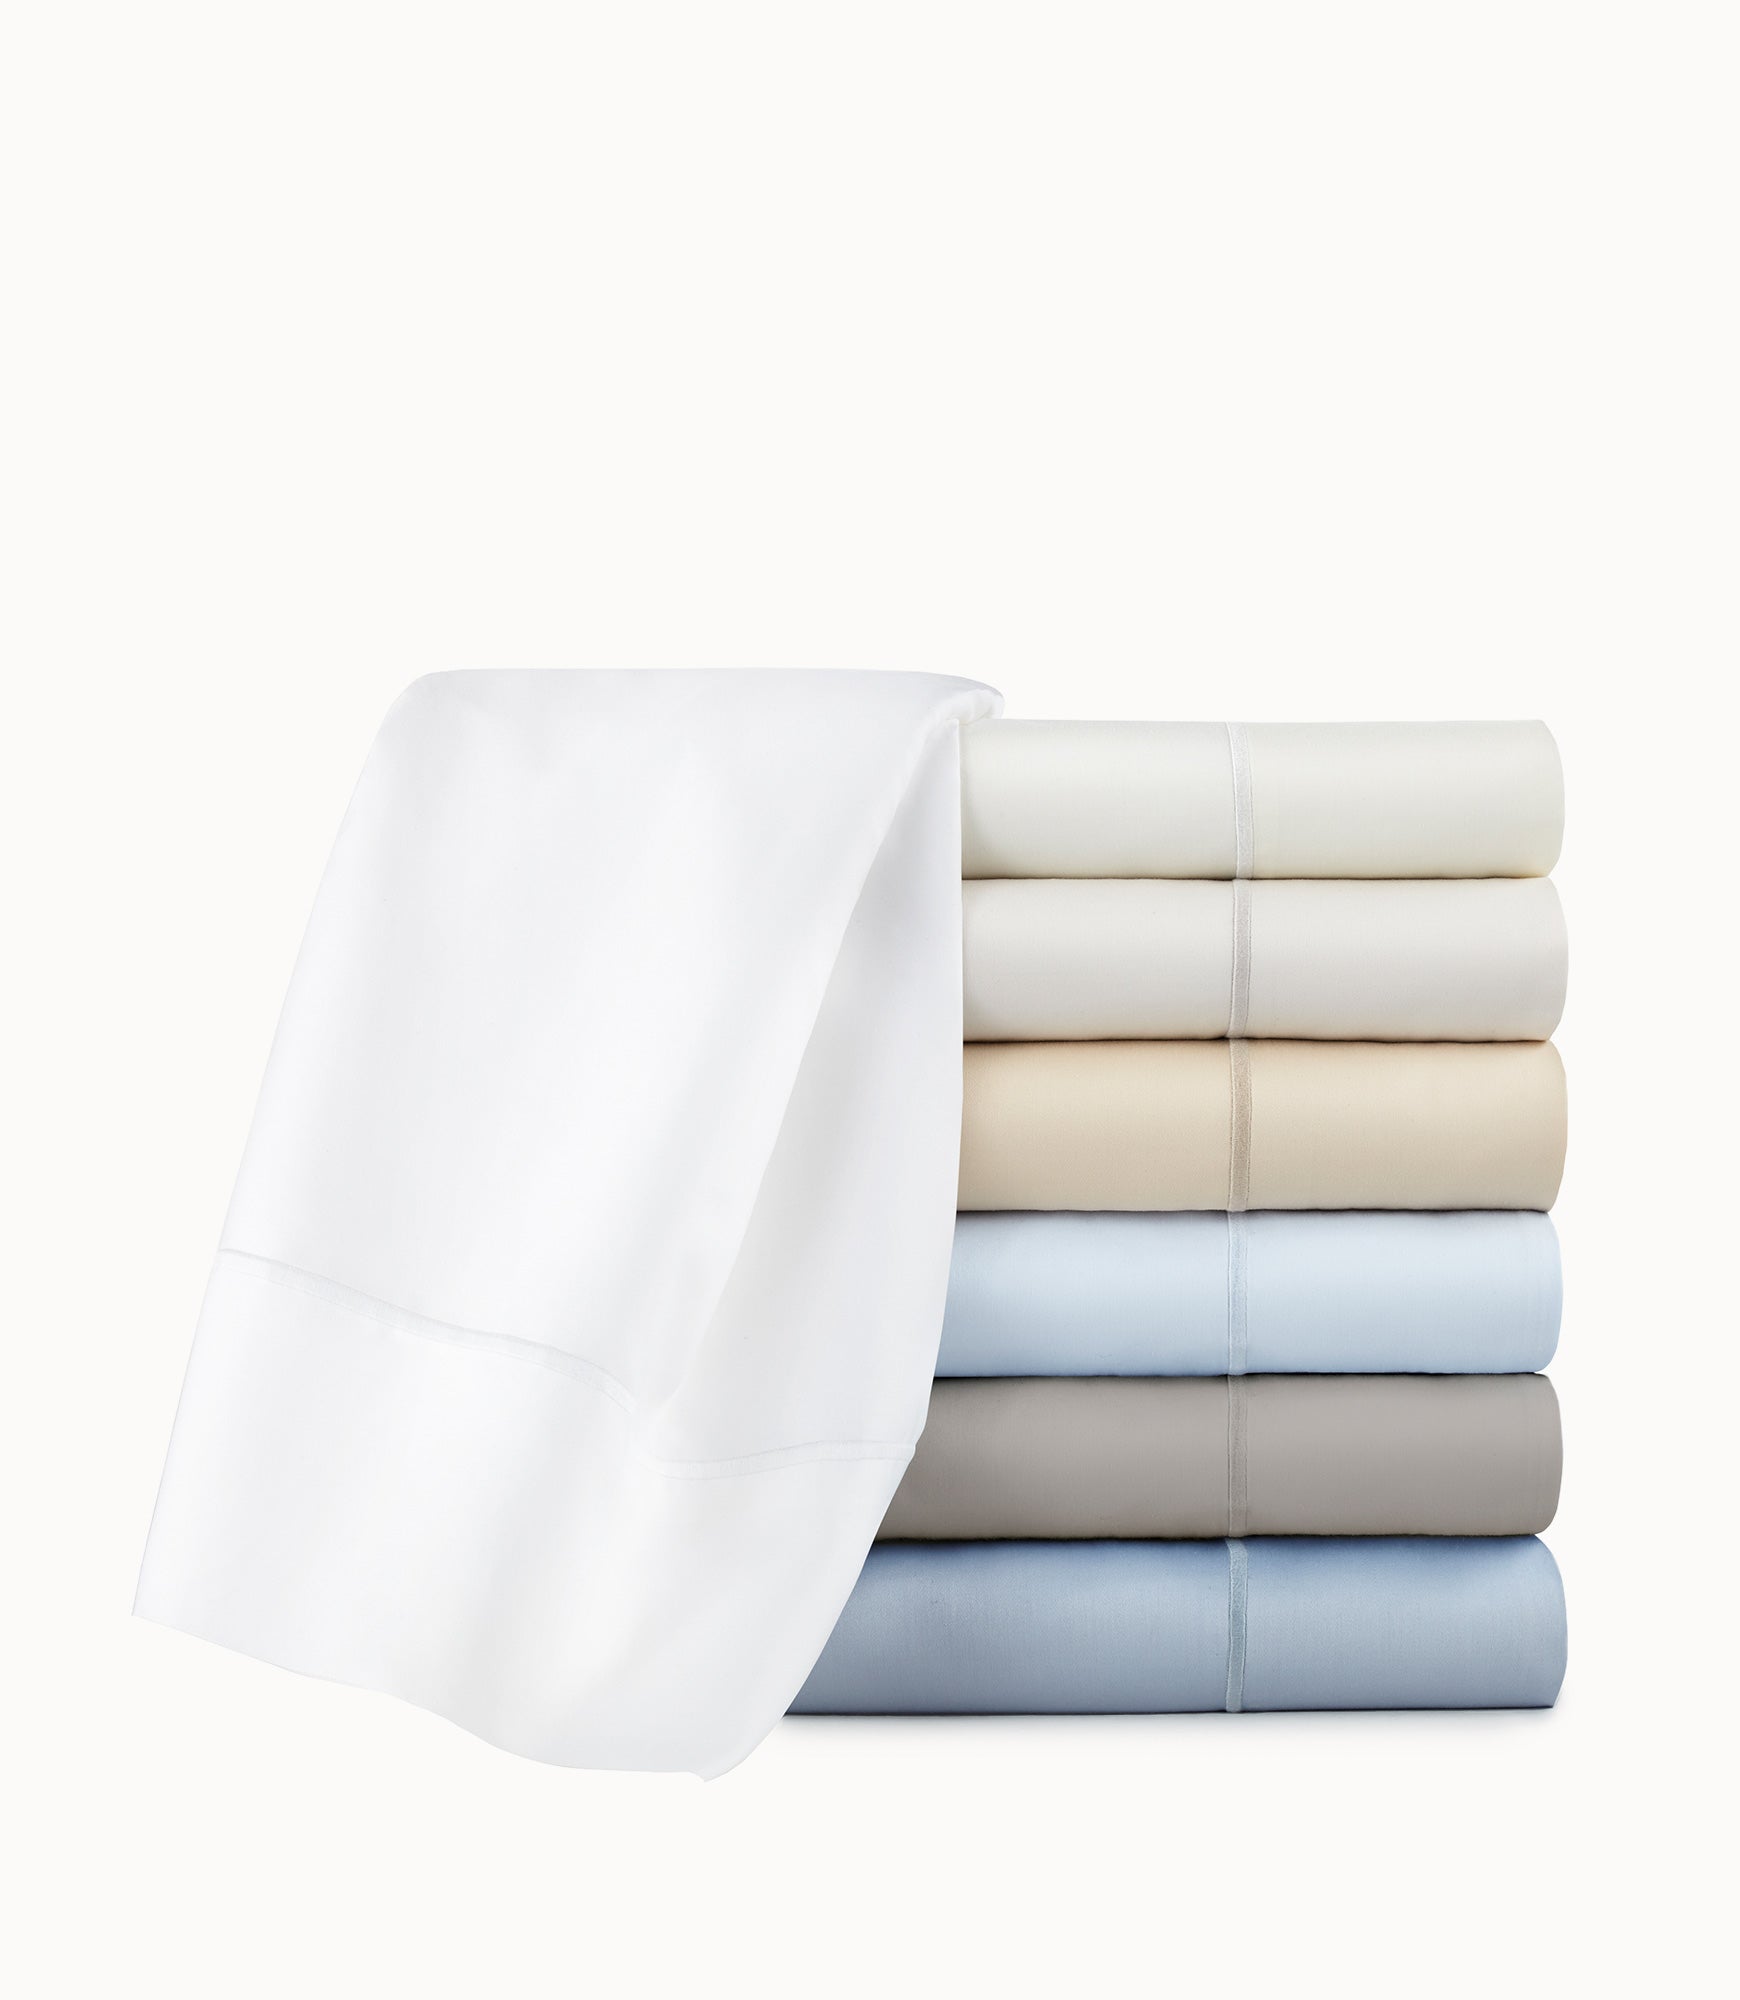 Does Thread Count Matter? Not Anymore The Facts on Thread Count -  Standard Textile